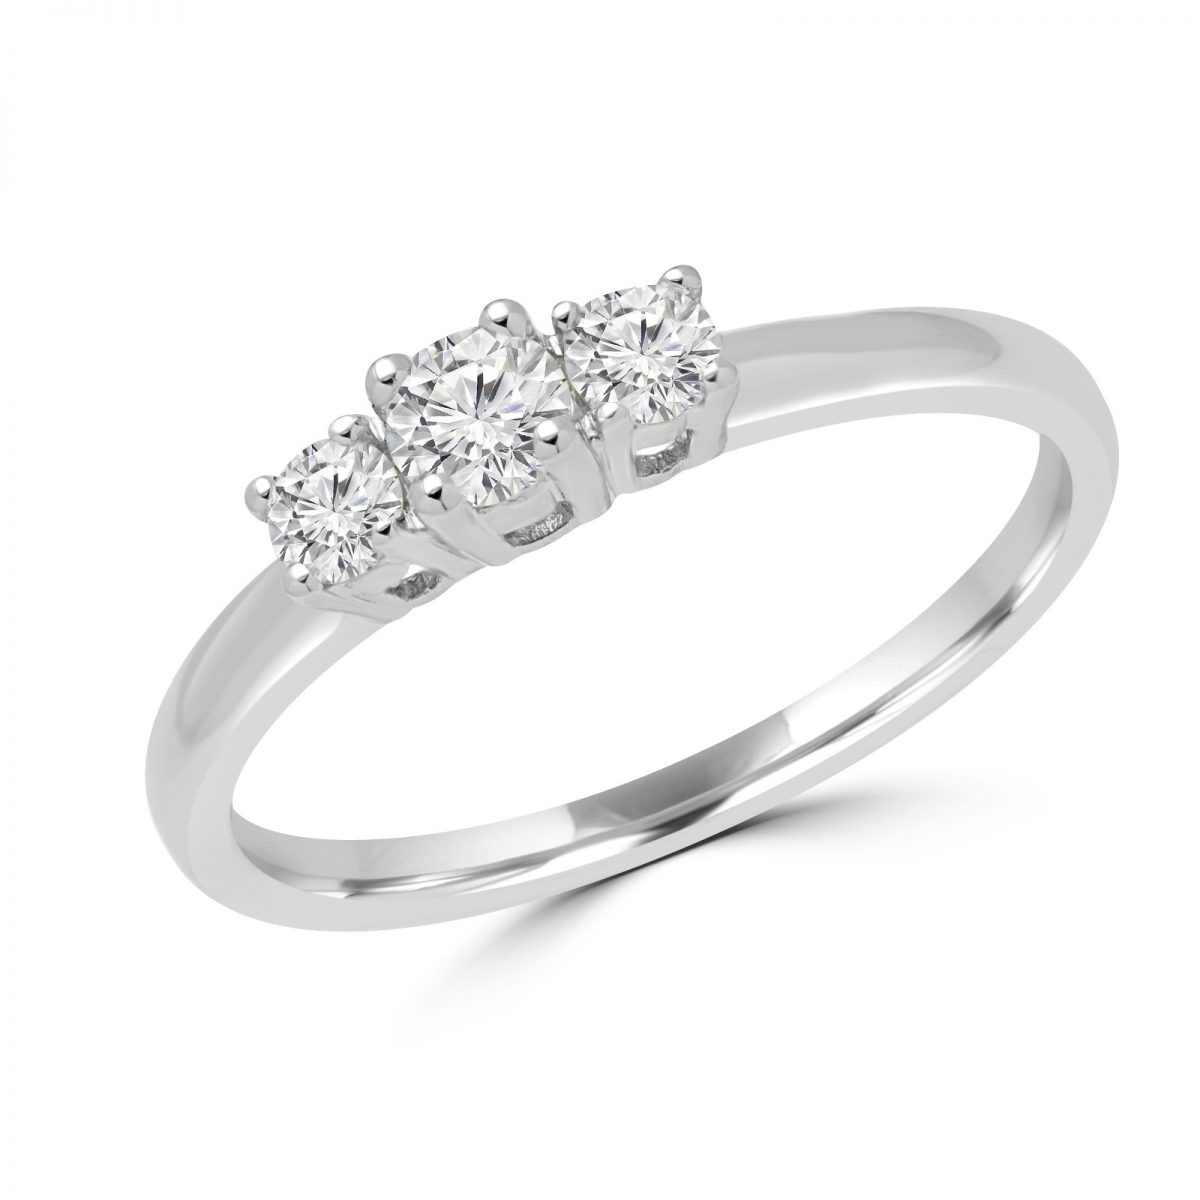 Trinity engagement ring 0.30 (ctw) in 10k white gold